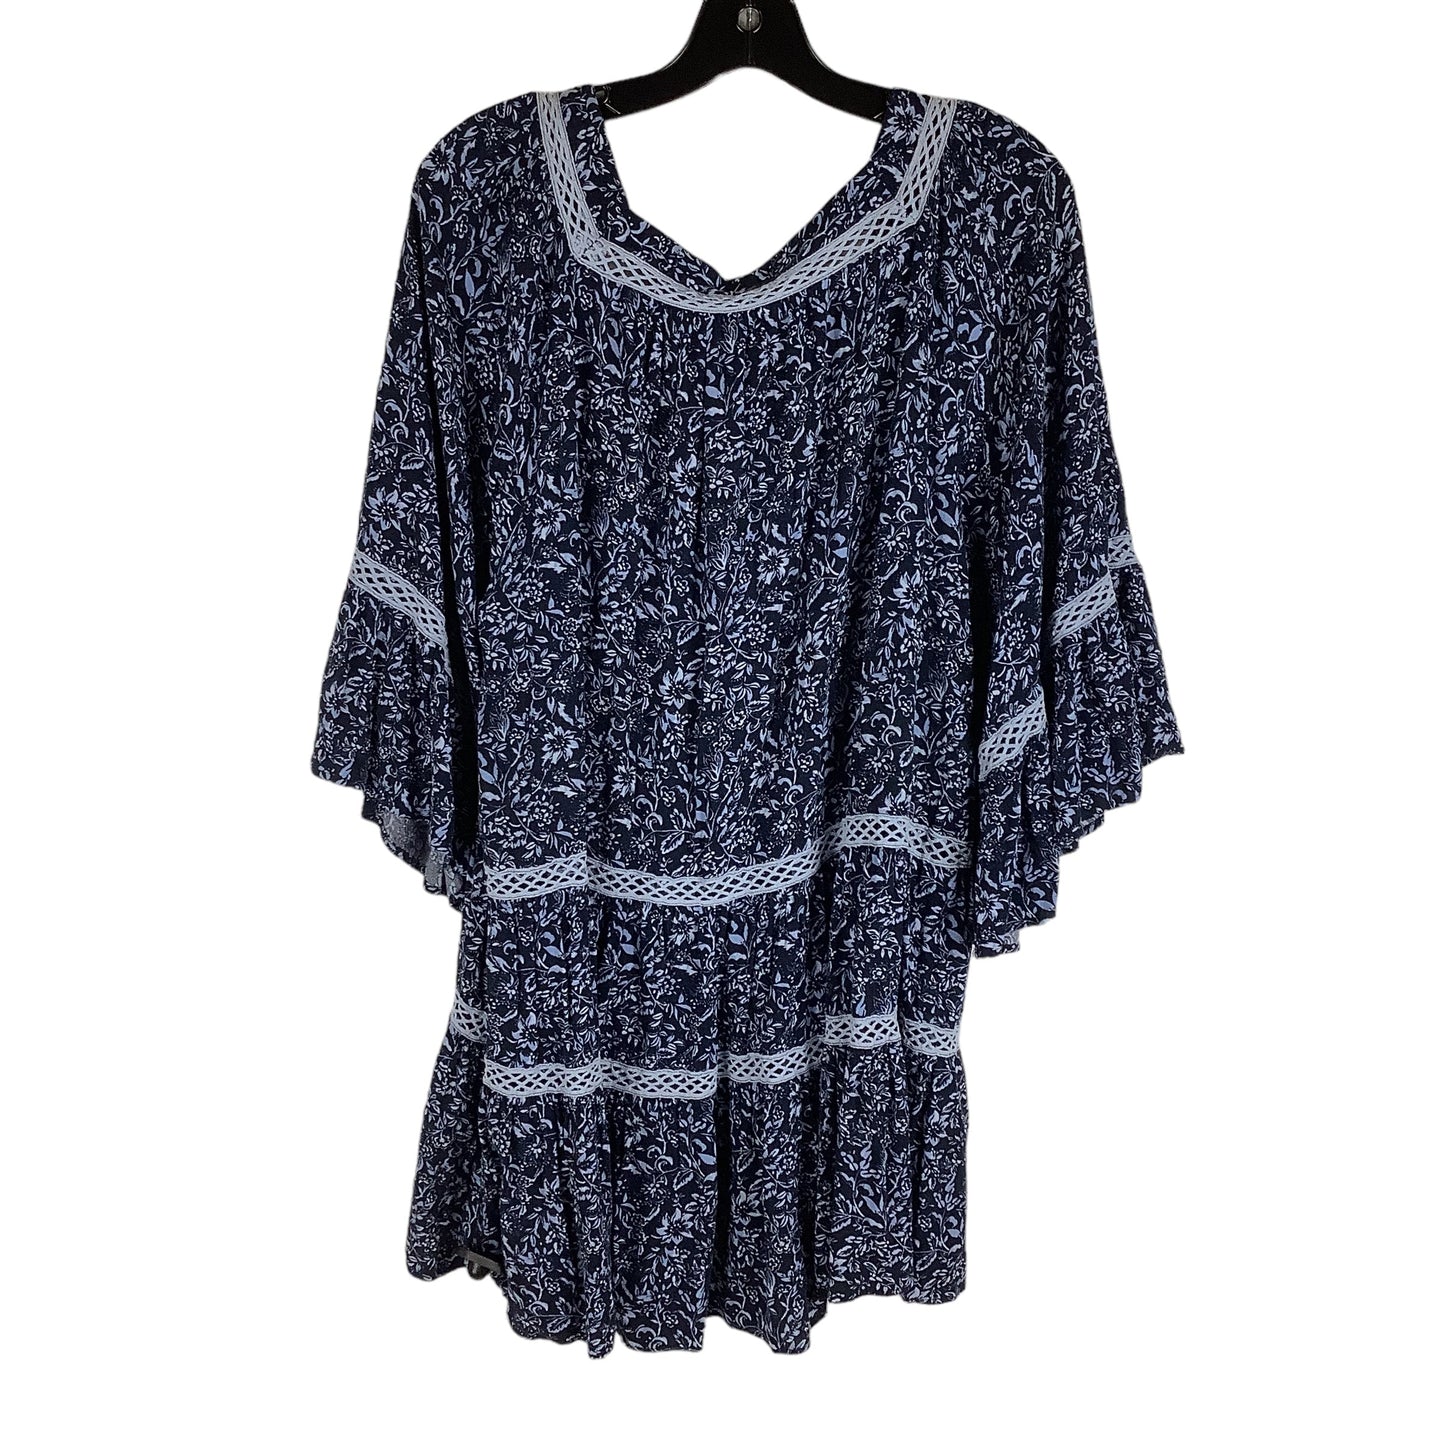 Navy Top Long Sleeve Free People, Size L